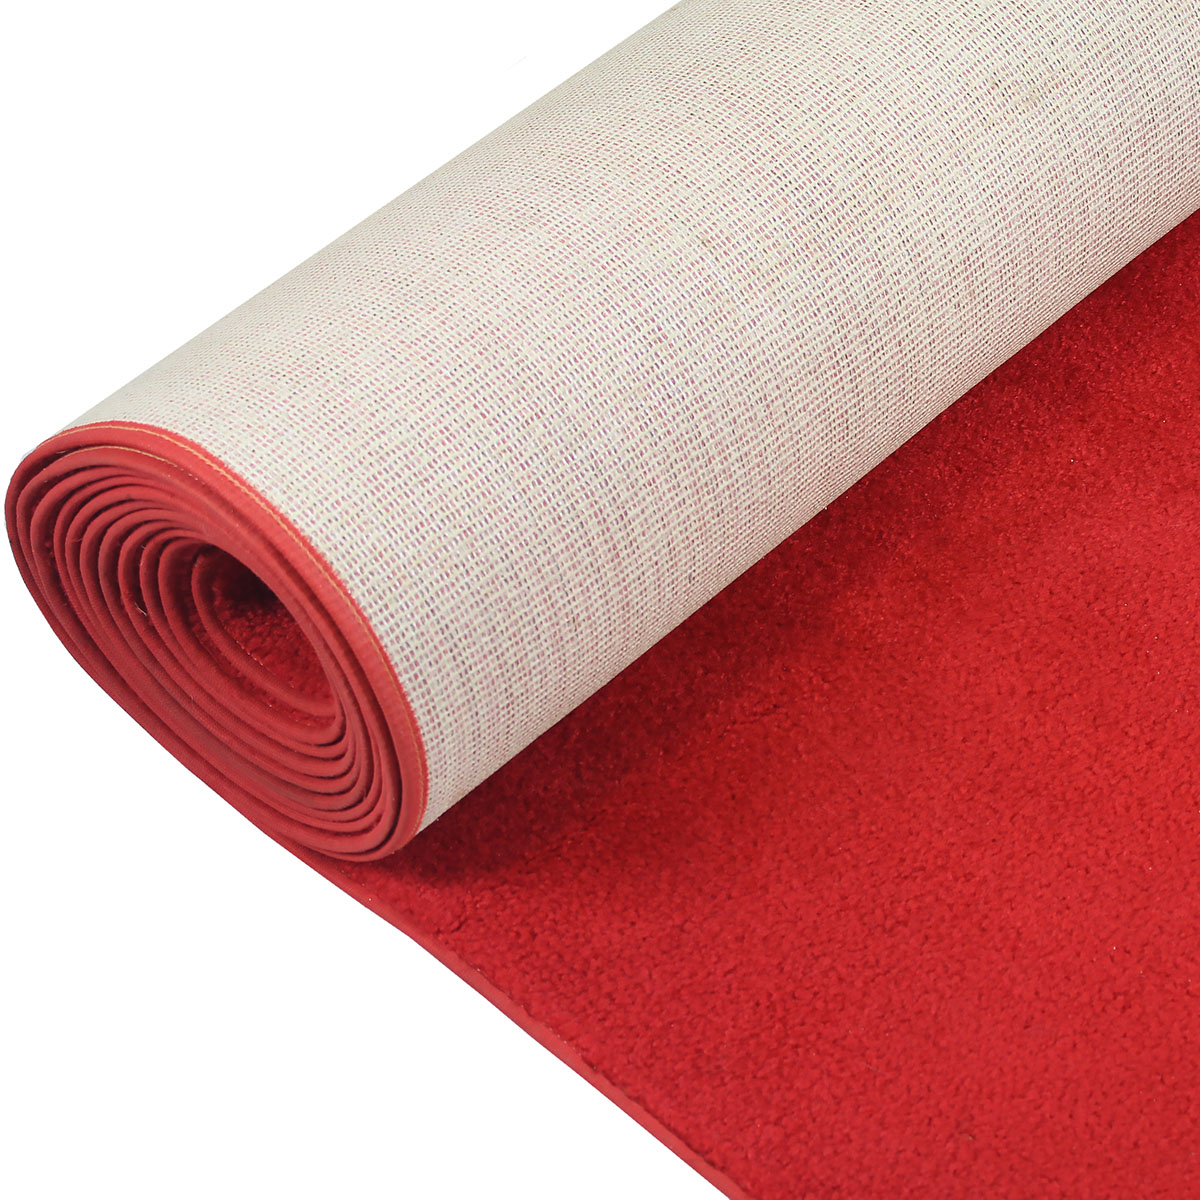 25' Red Carpet Runners-FOR SALE